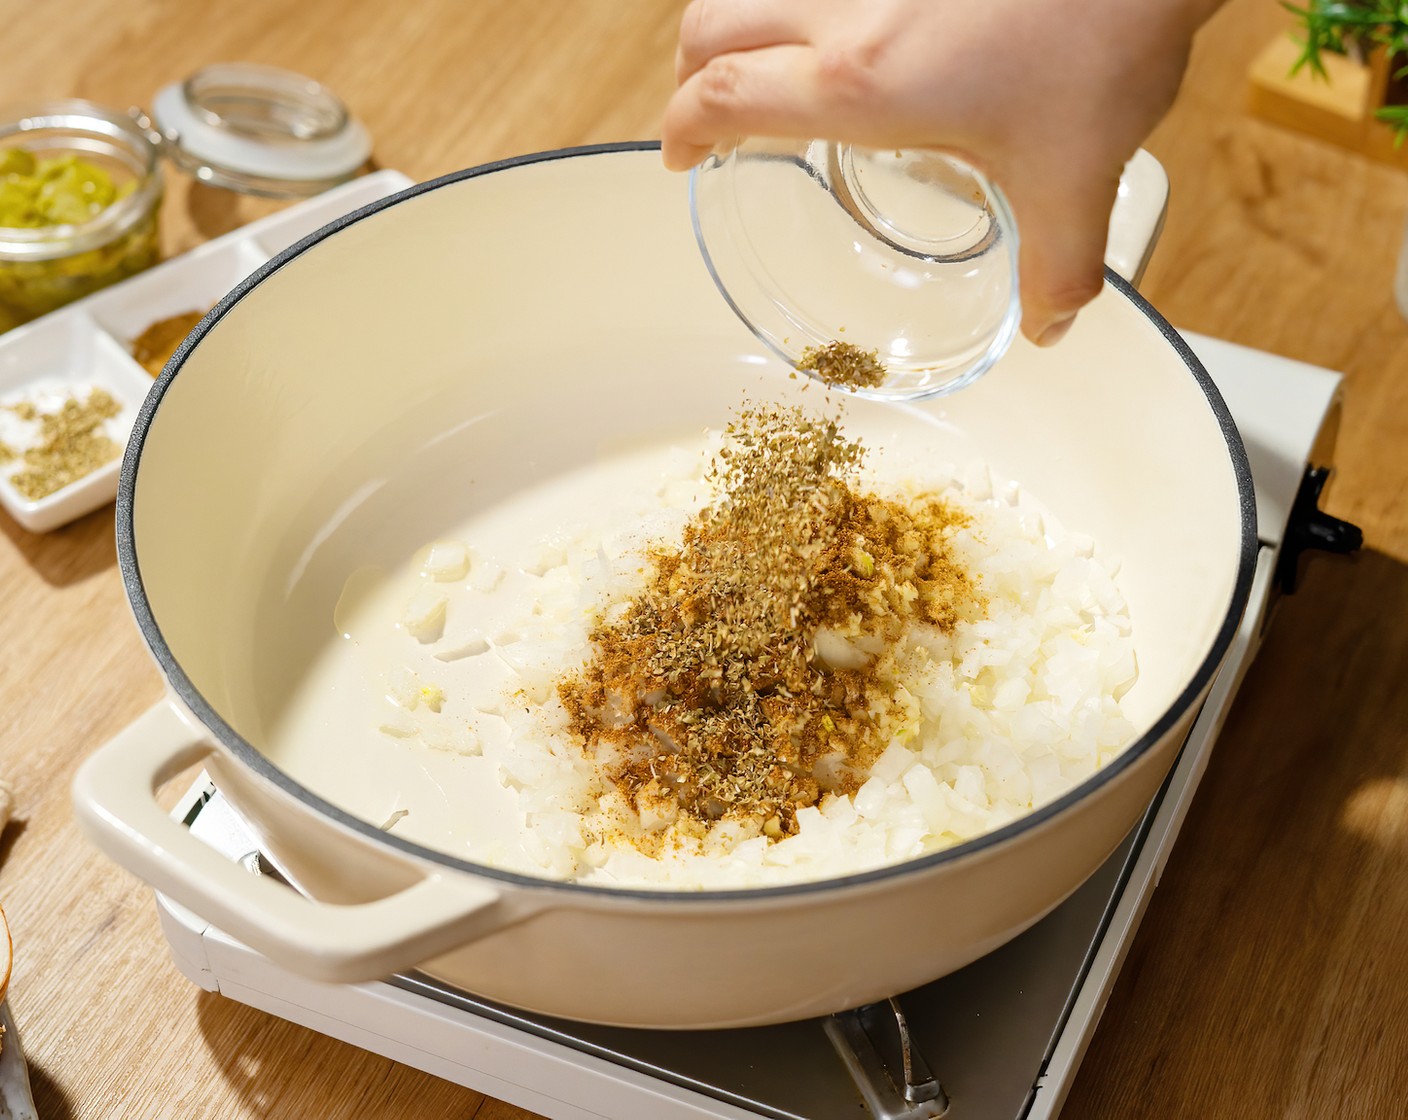 step 1 In a dutch oven or heavy-bottomed pot, heat up the Olive Oil (1 Tbsp) over medium-high heat. Once hot add the Yellow Onion (1), Garlic (4 cloves), Ground Cumin (1/2 Tbsp), Dried Oregano (1 tsp), and Cayenne Pepper (1/2 tsp). Cook for 3 minutes until the onions begin to soften.